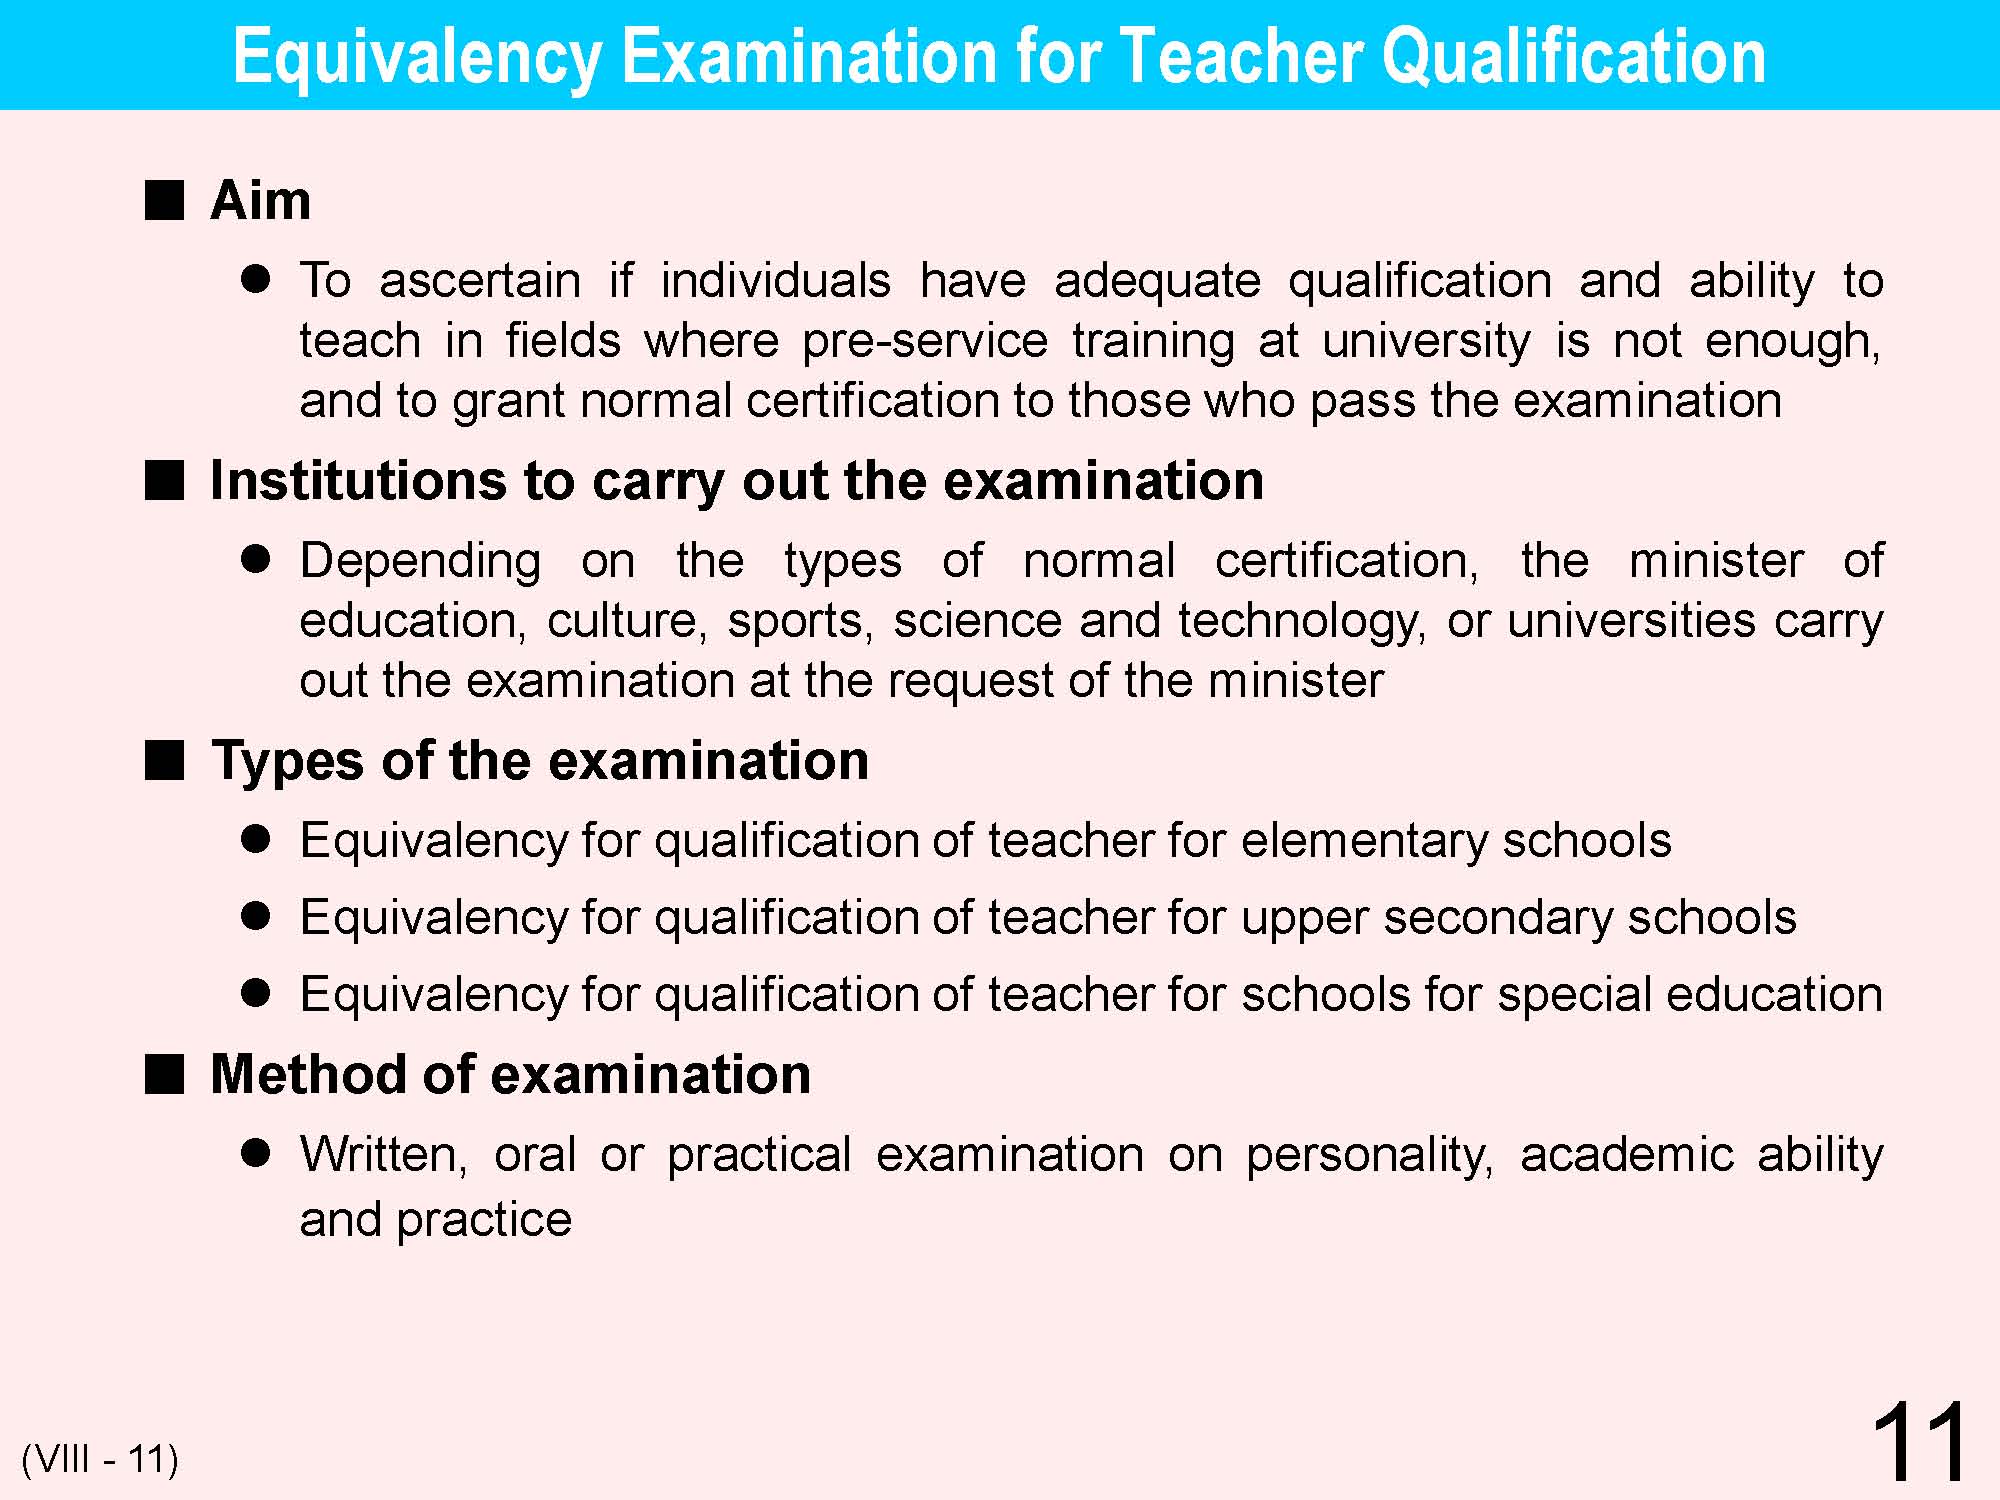 VIII Teacher's Qualifications/Training/Appointment